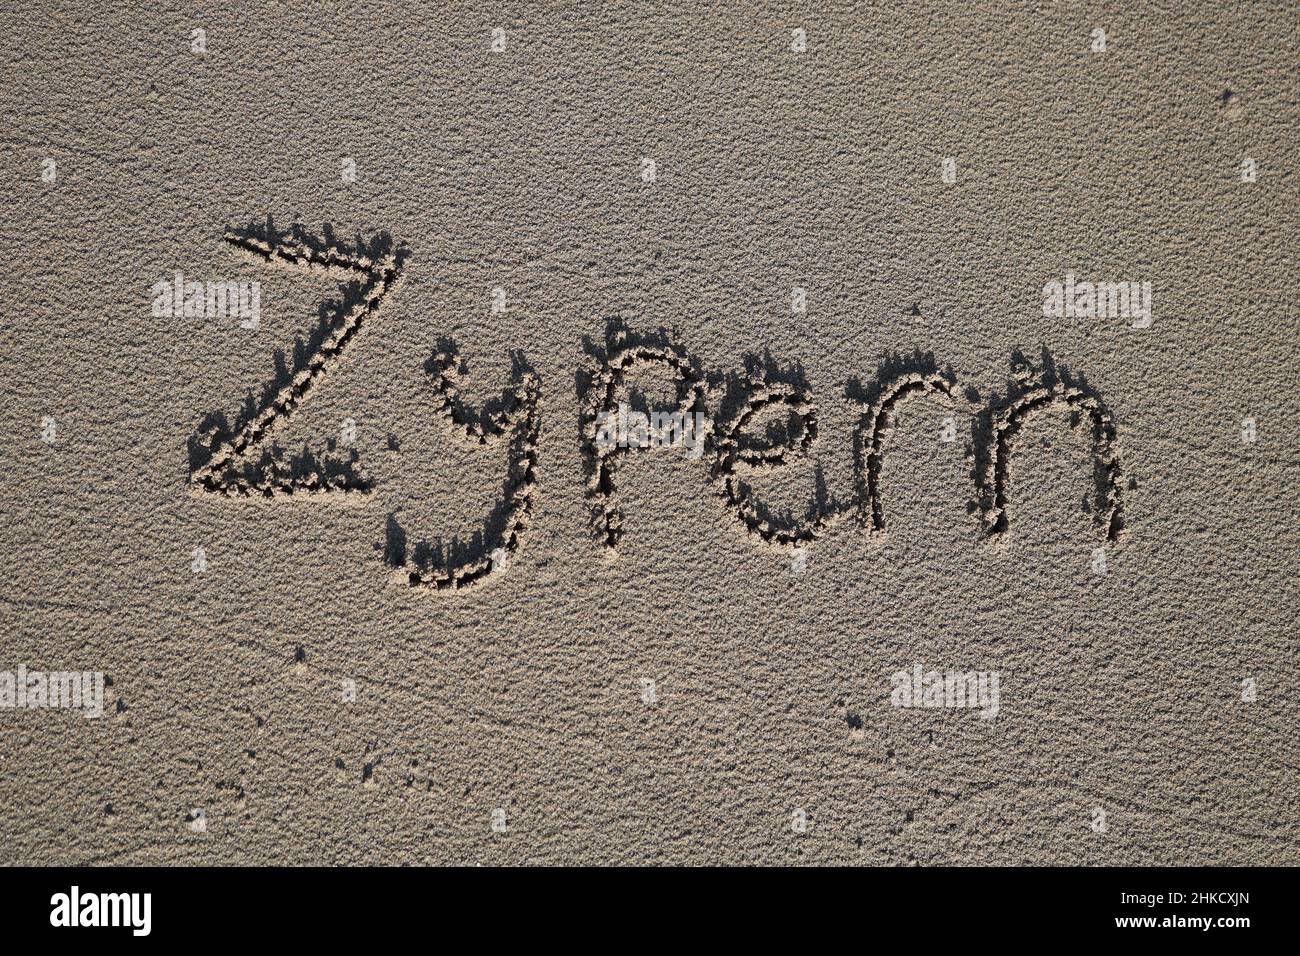 The Word 'Zypern' written in the sand in Cyprus Stock Photo